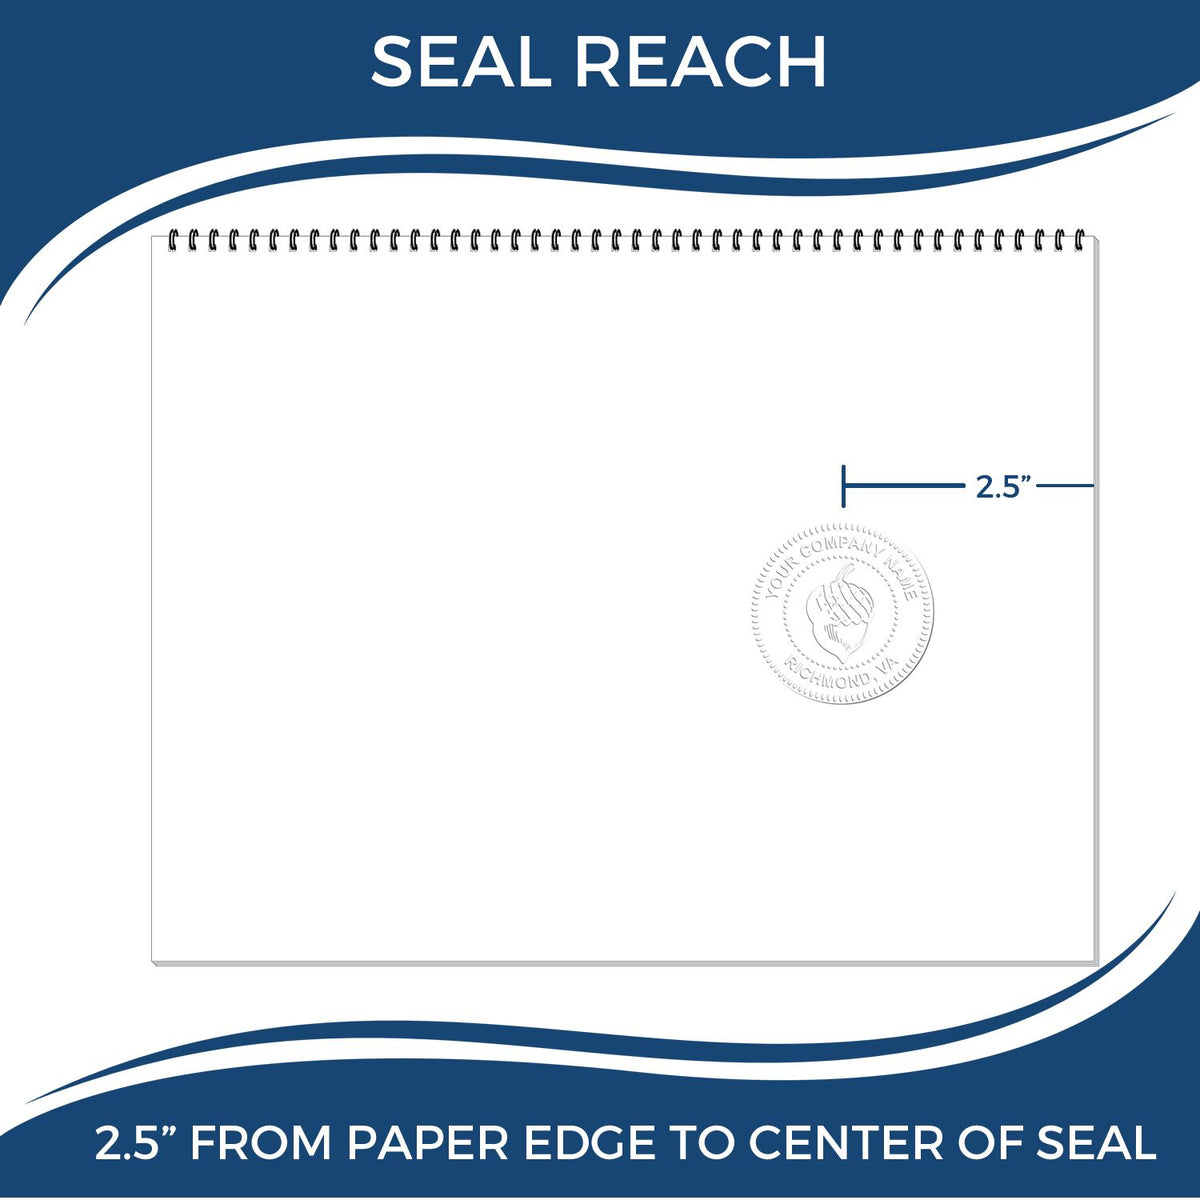 An infographic showing the seal reach which is represented by a ruler and a miniature seal image of the Heavy Duty Cast Iron Texas Geologist Seal Embosser